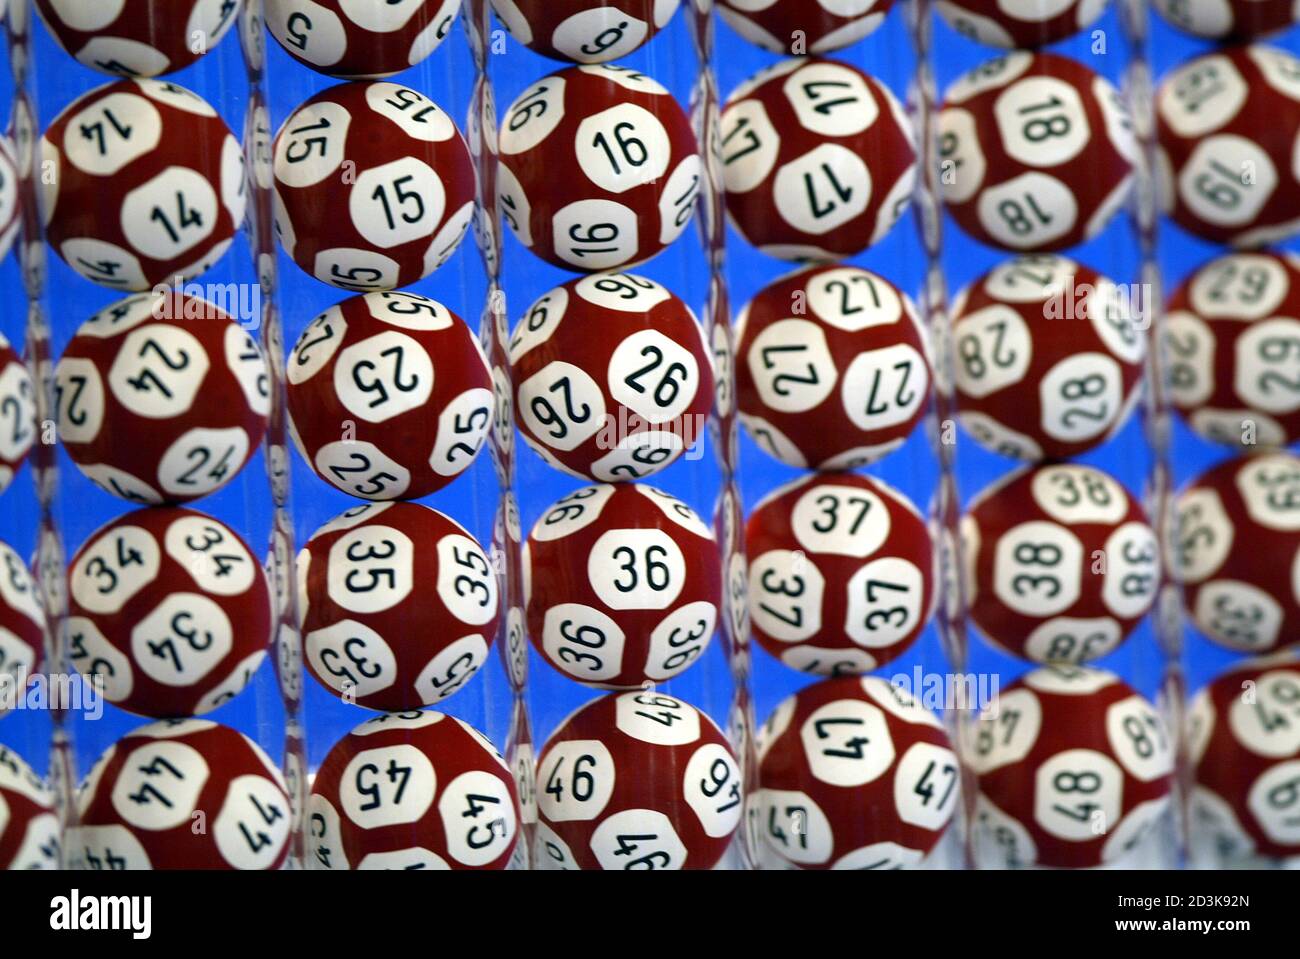 Balls are seen during a rehearsal for the new Euro-million loto draw at  Boulogne-Billancourt near Paris February 13, 2004. The Euro-million loto  will be played simultaneously in [England, Spain] and France with